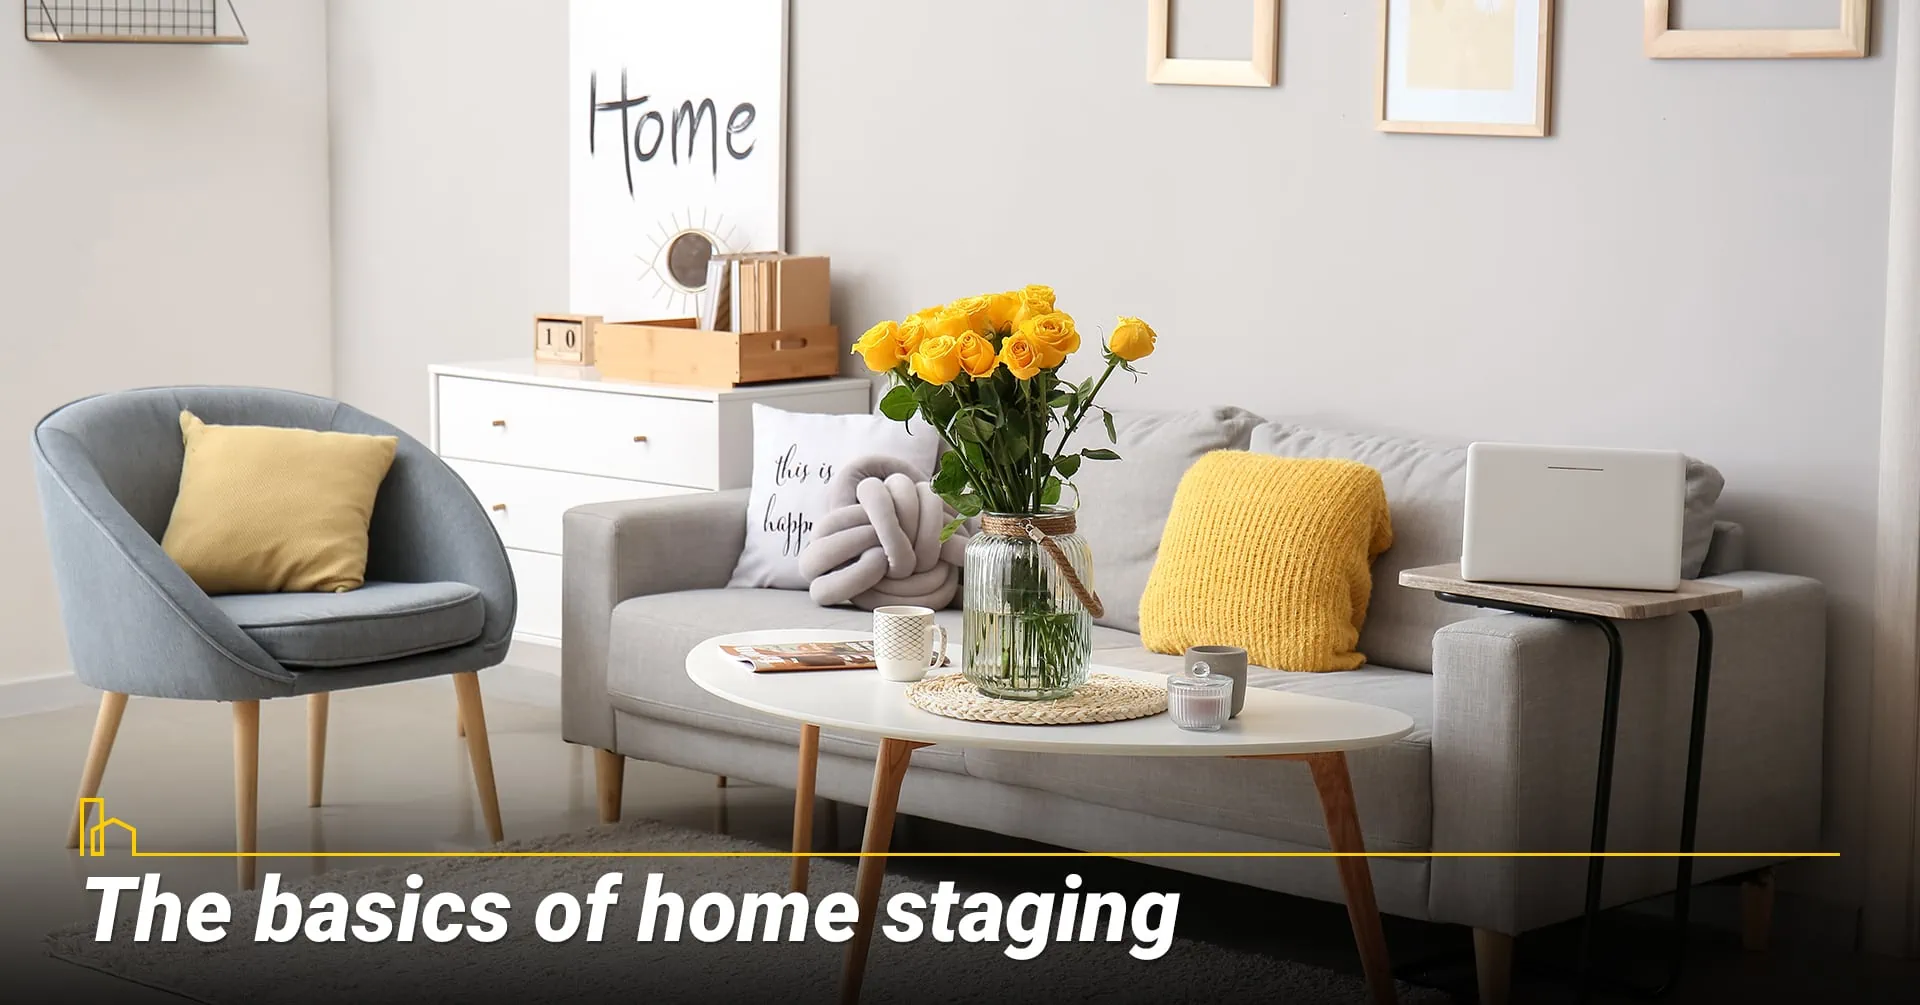 1. The basics of home staging1. The basics of home staging